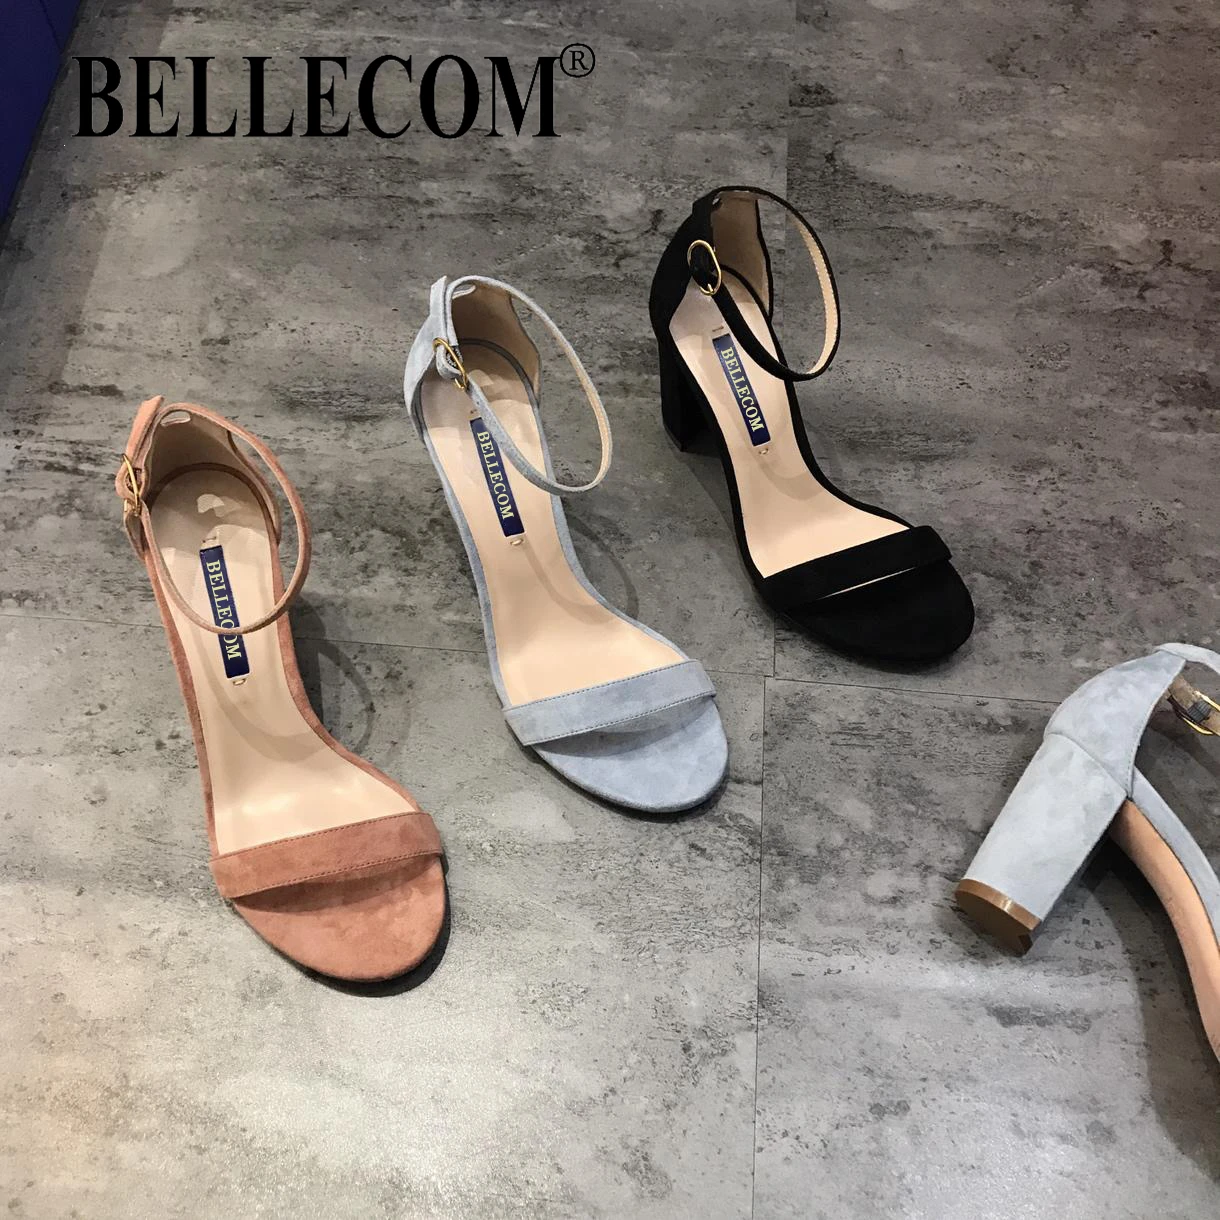 

SONFRNCH Summer 2019 new coarse-heeled women's shoes sandals outdoor cashmere leather fashion Roman buckle wedding party